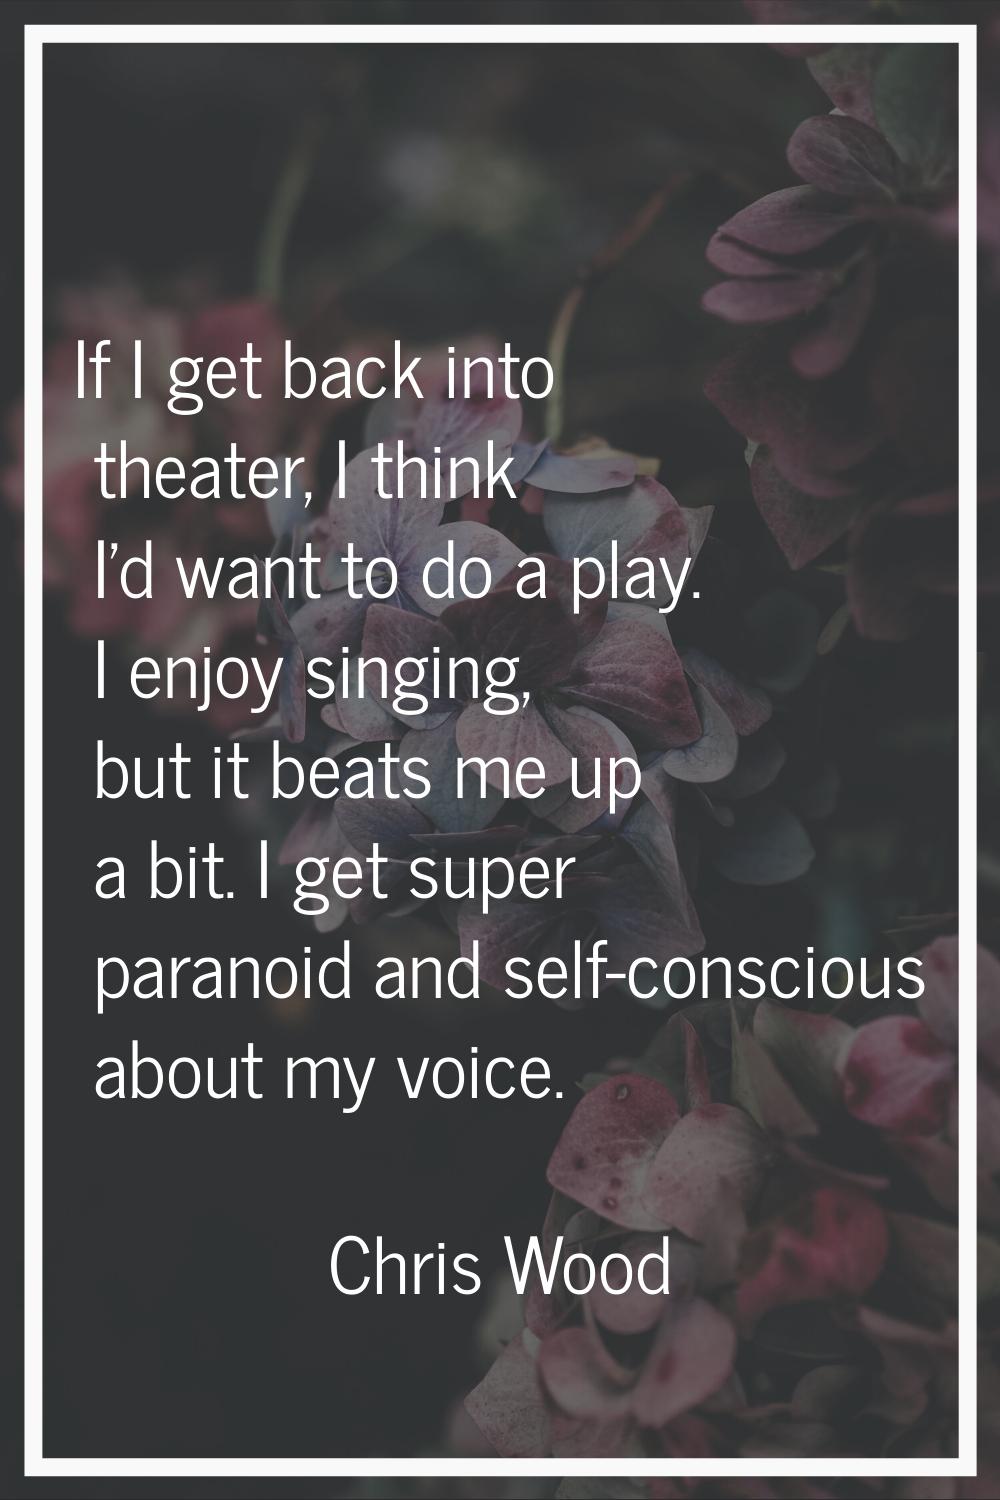 If I get back into theater, I think I'd want to do a play. I enjoy singing, but it beats me up a bi